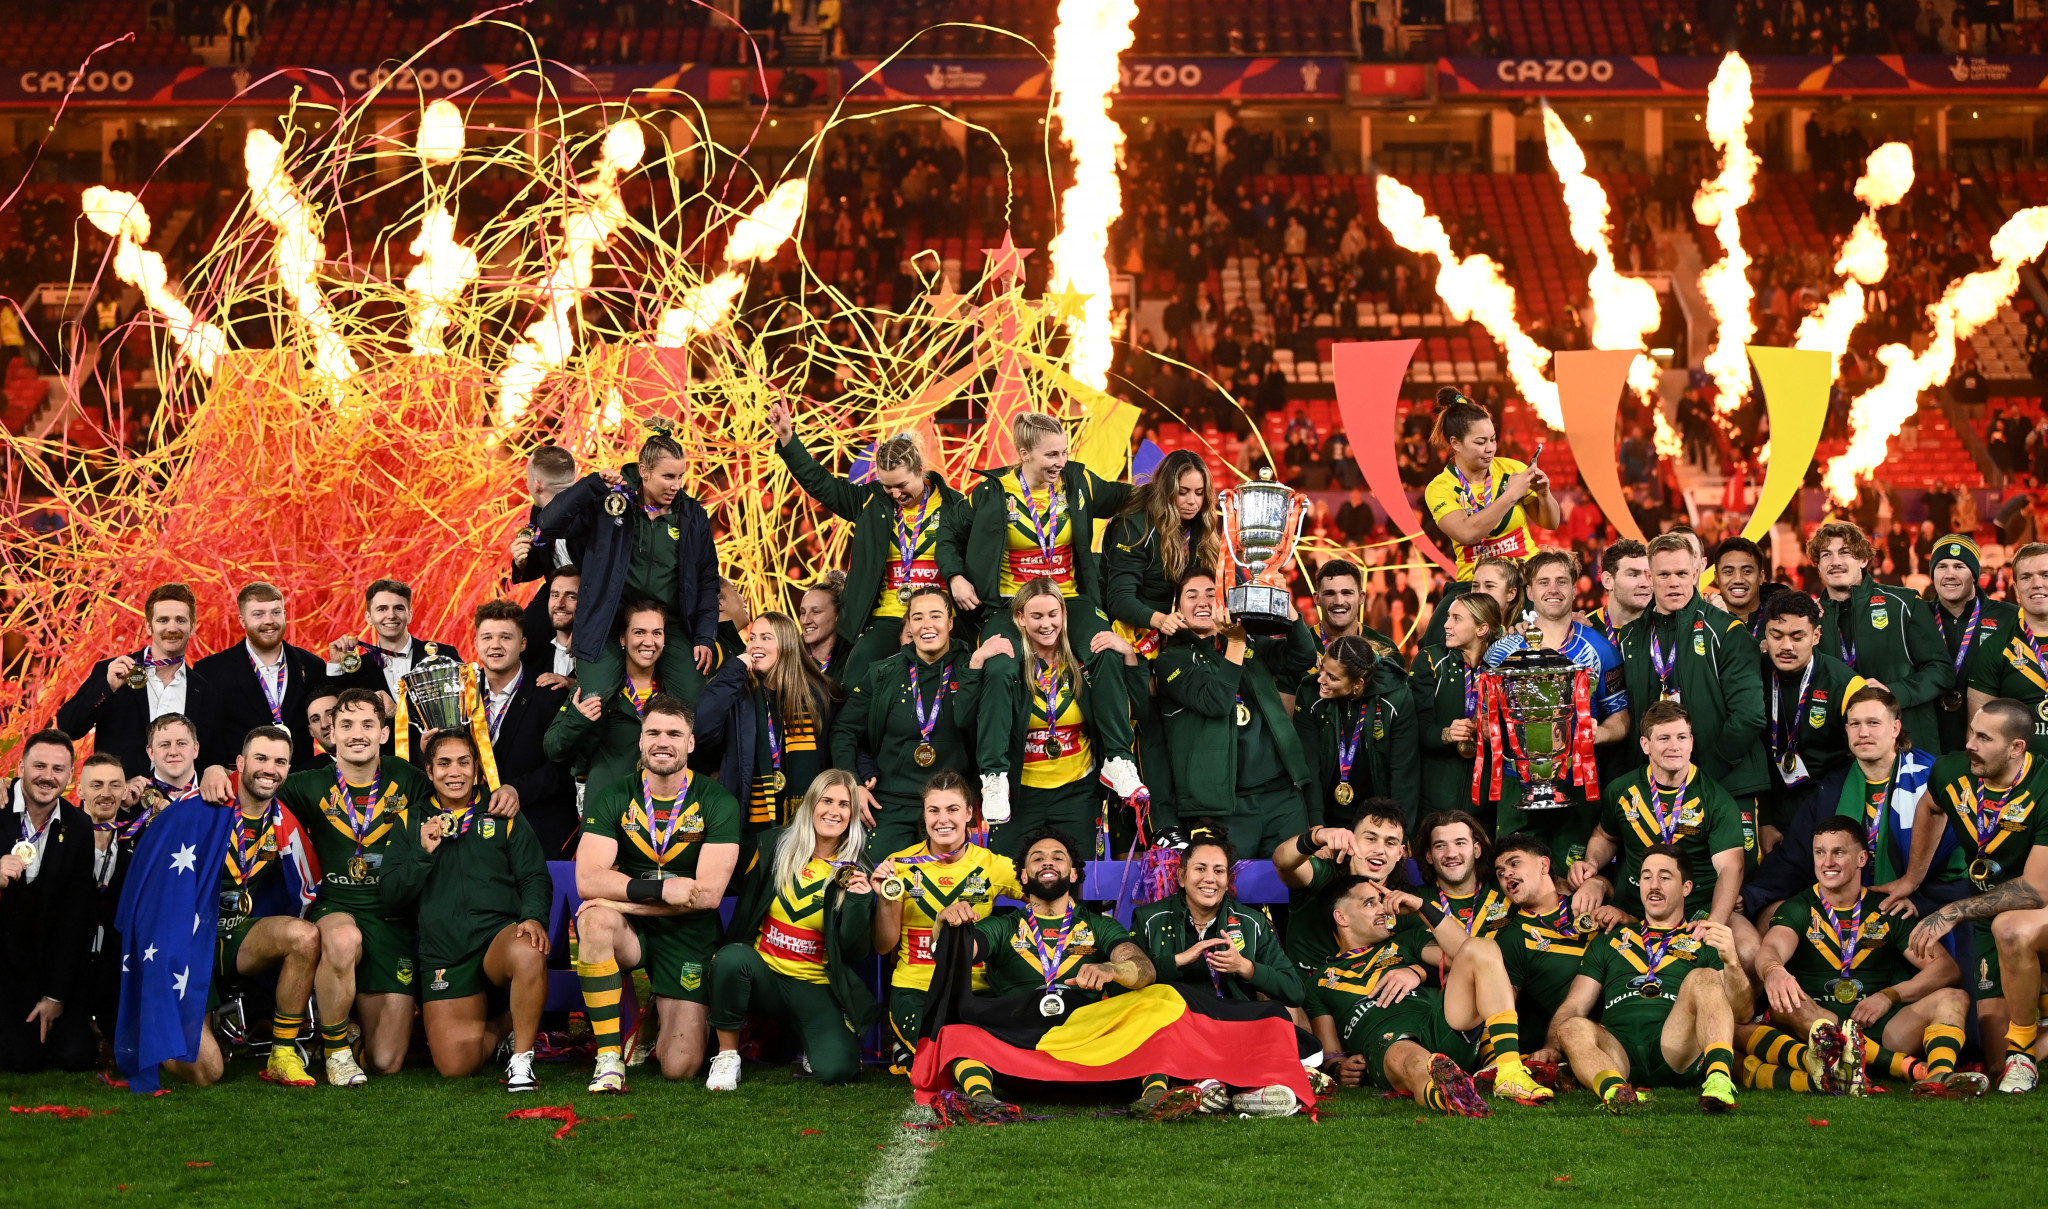 Australia seal men's and women's titles at Rugby League World Cup Finals